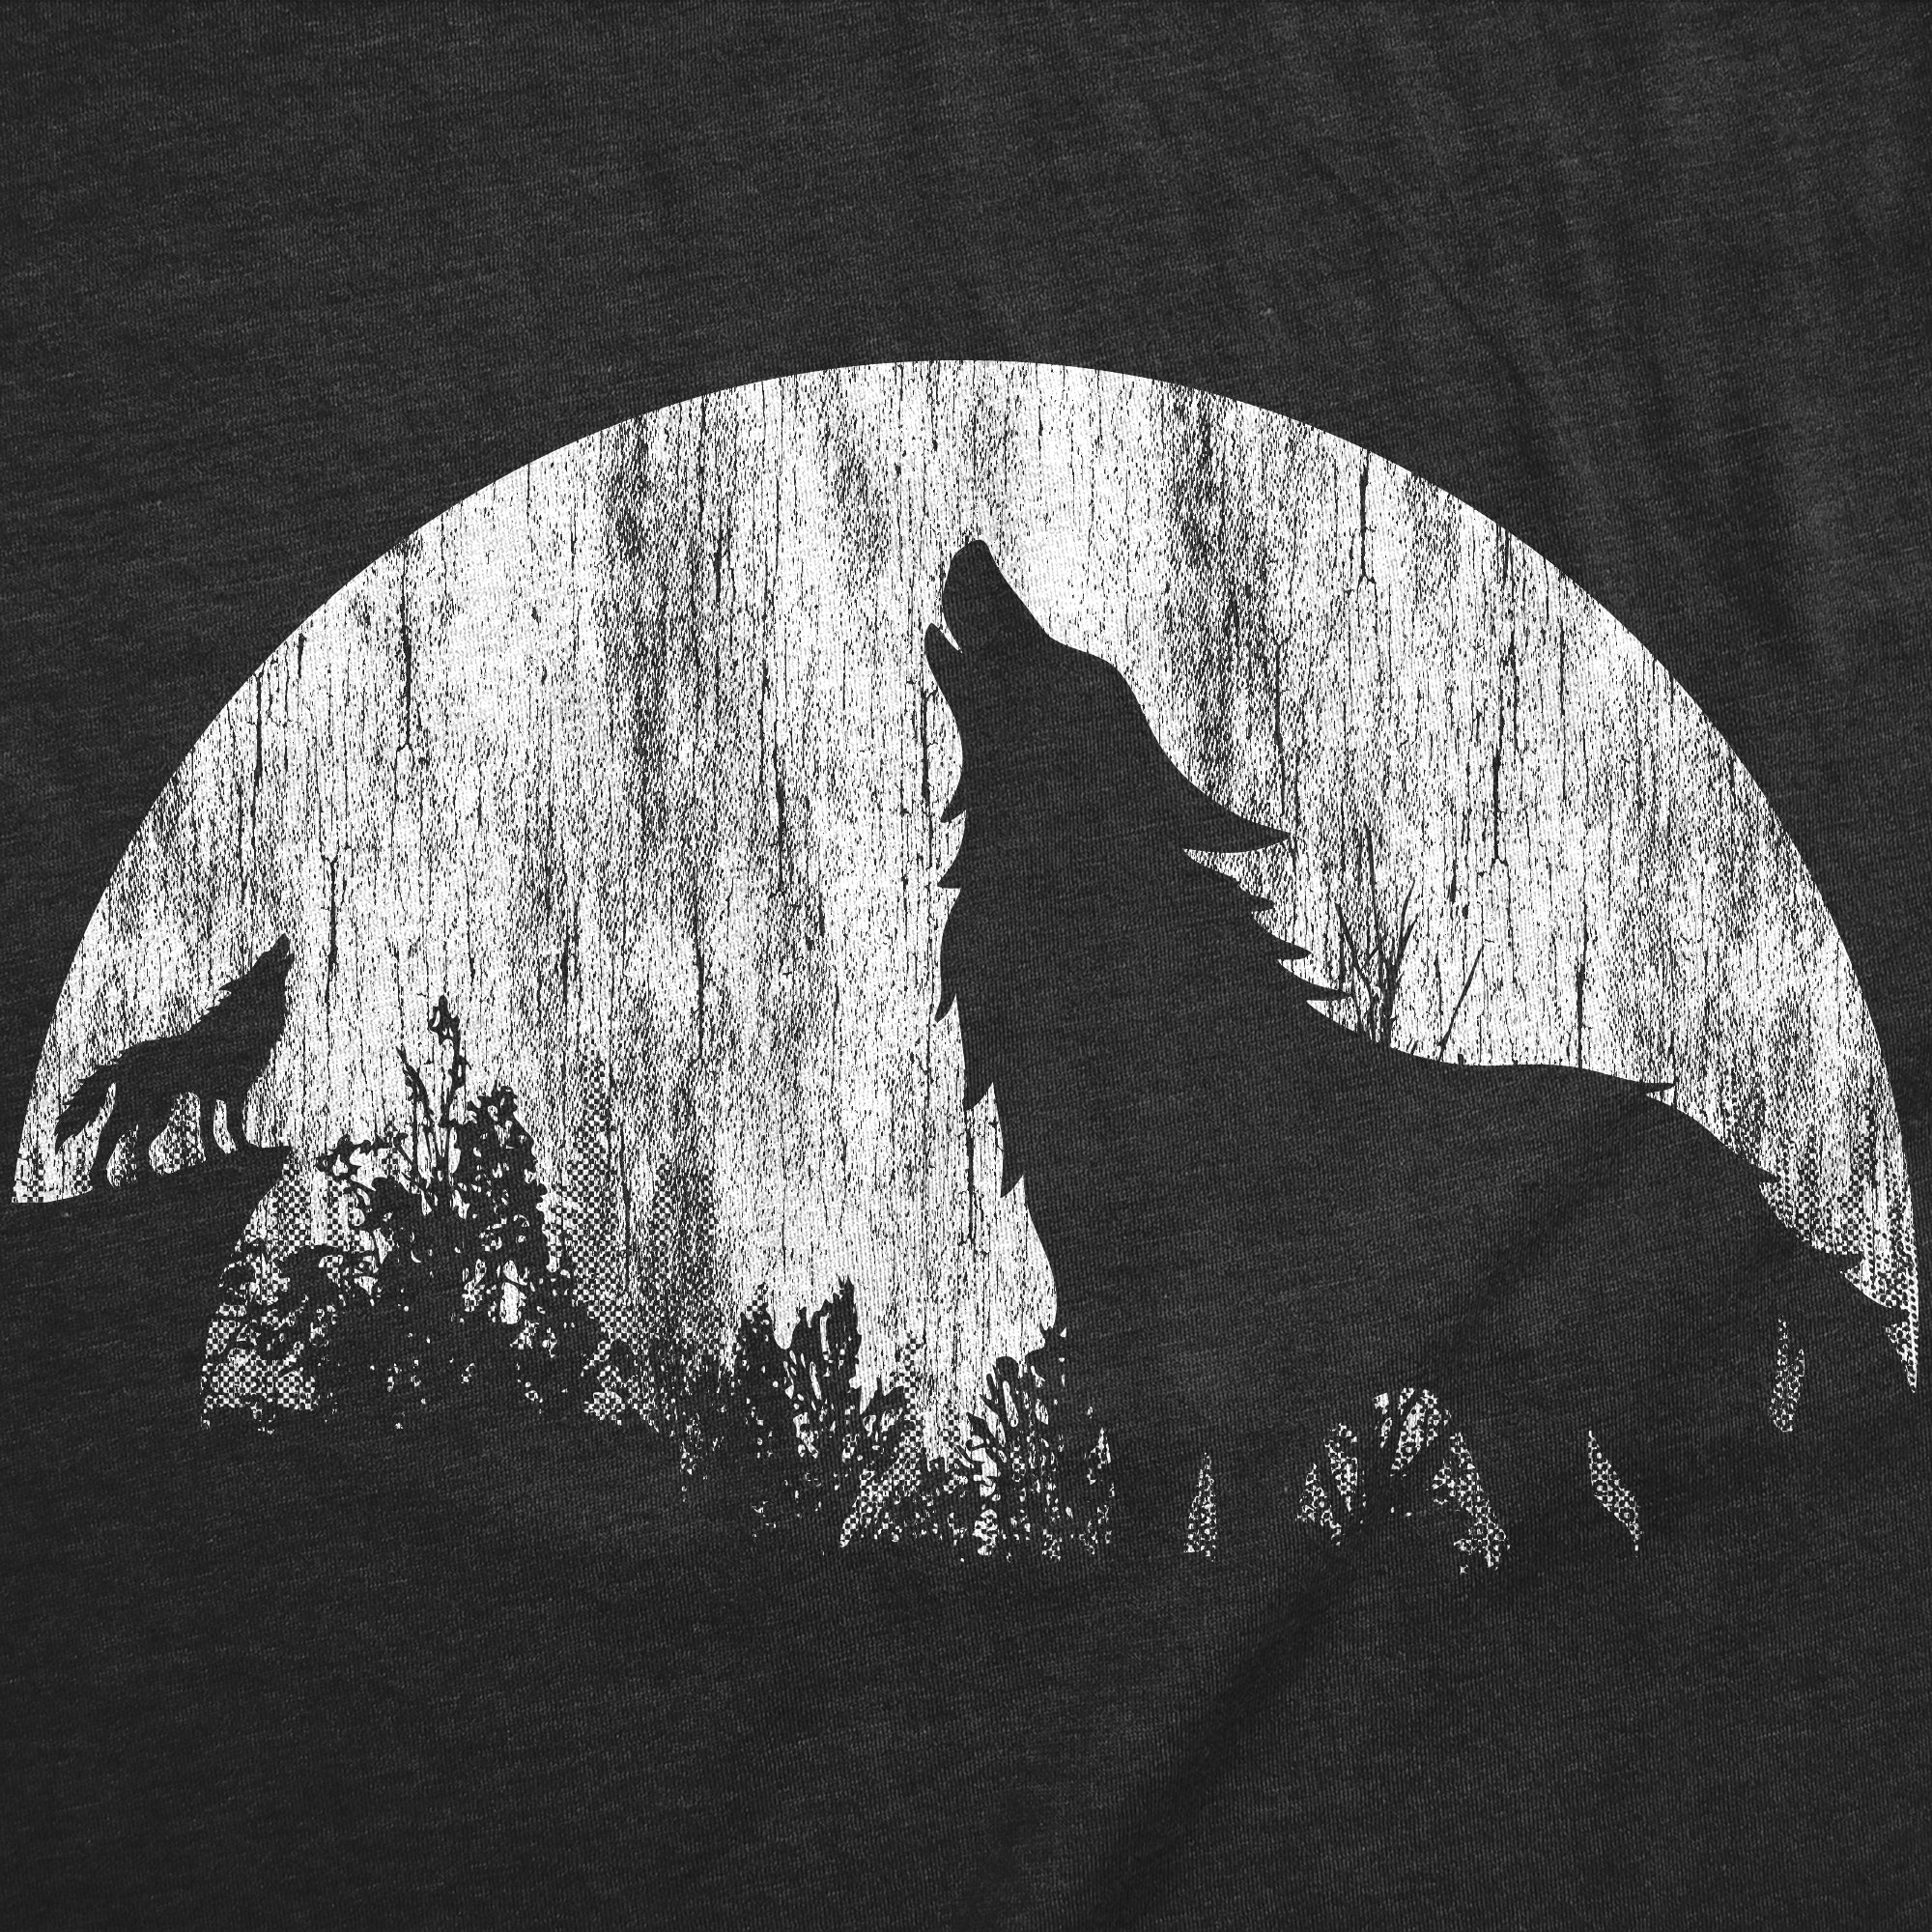 Funny Heather Black - Moon Wolves Moon Wolves Womens T Shirt Nerdy Animal Tee